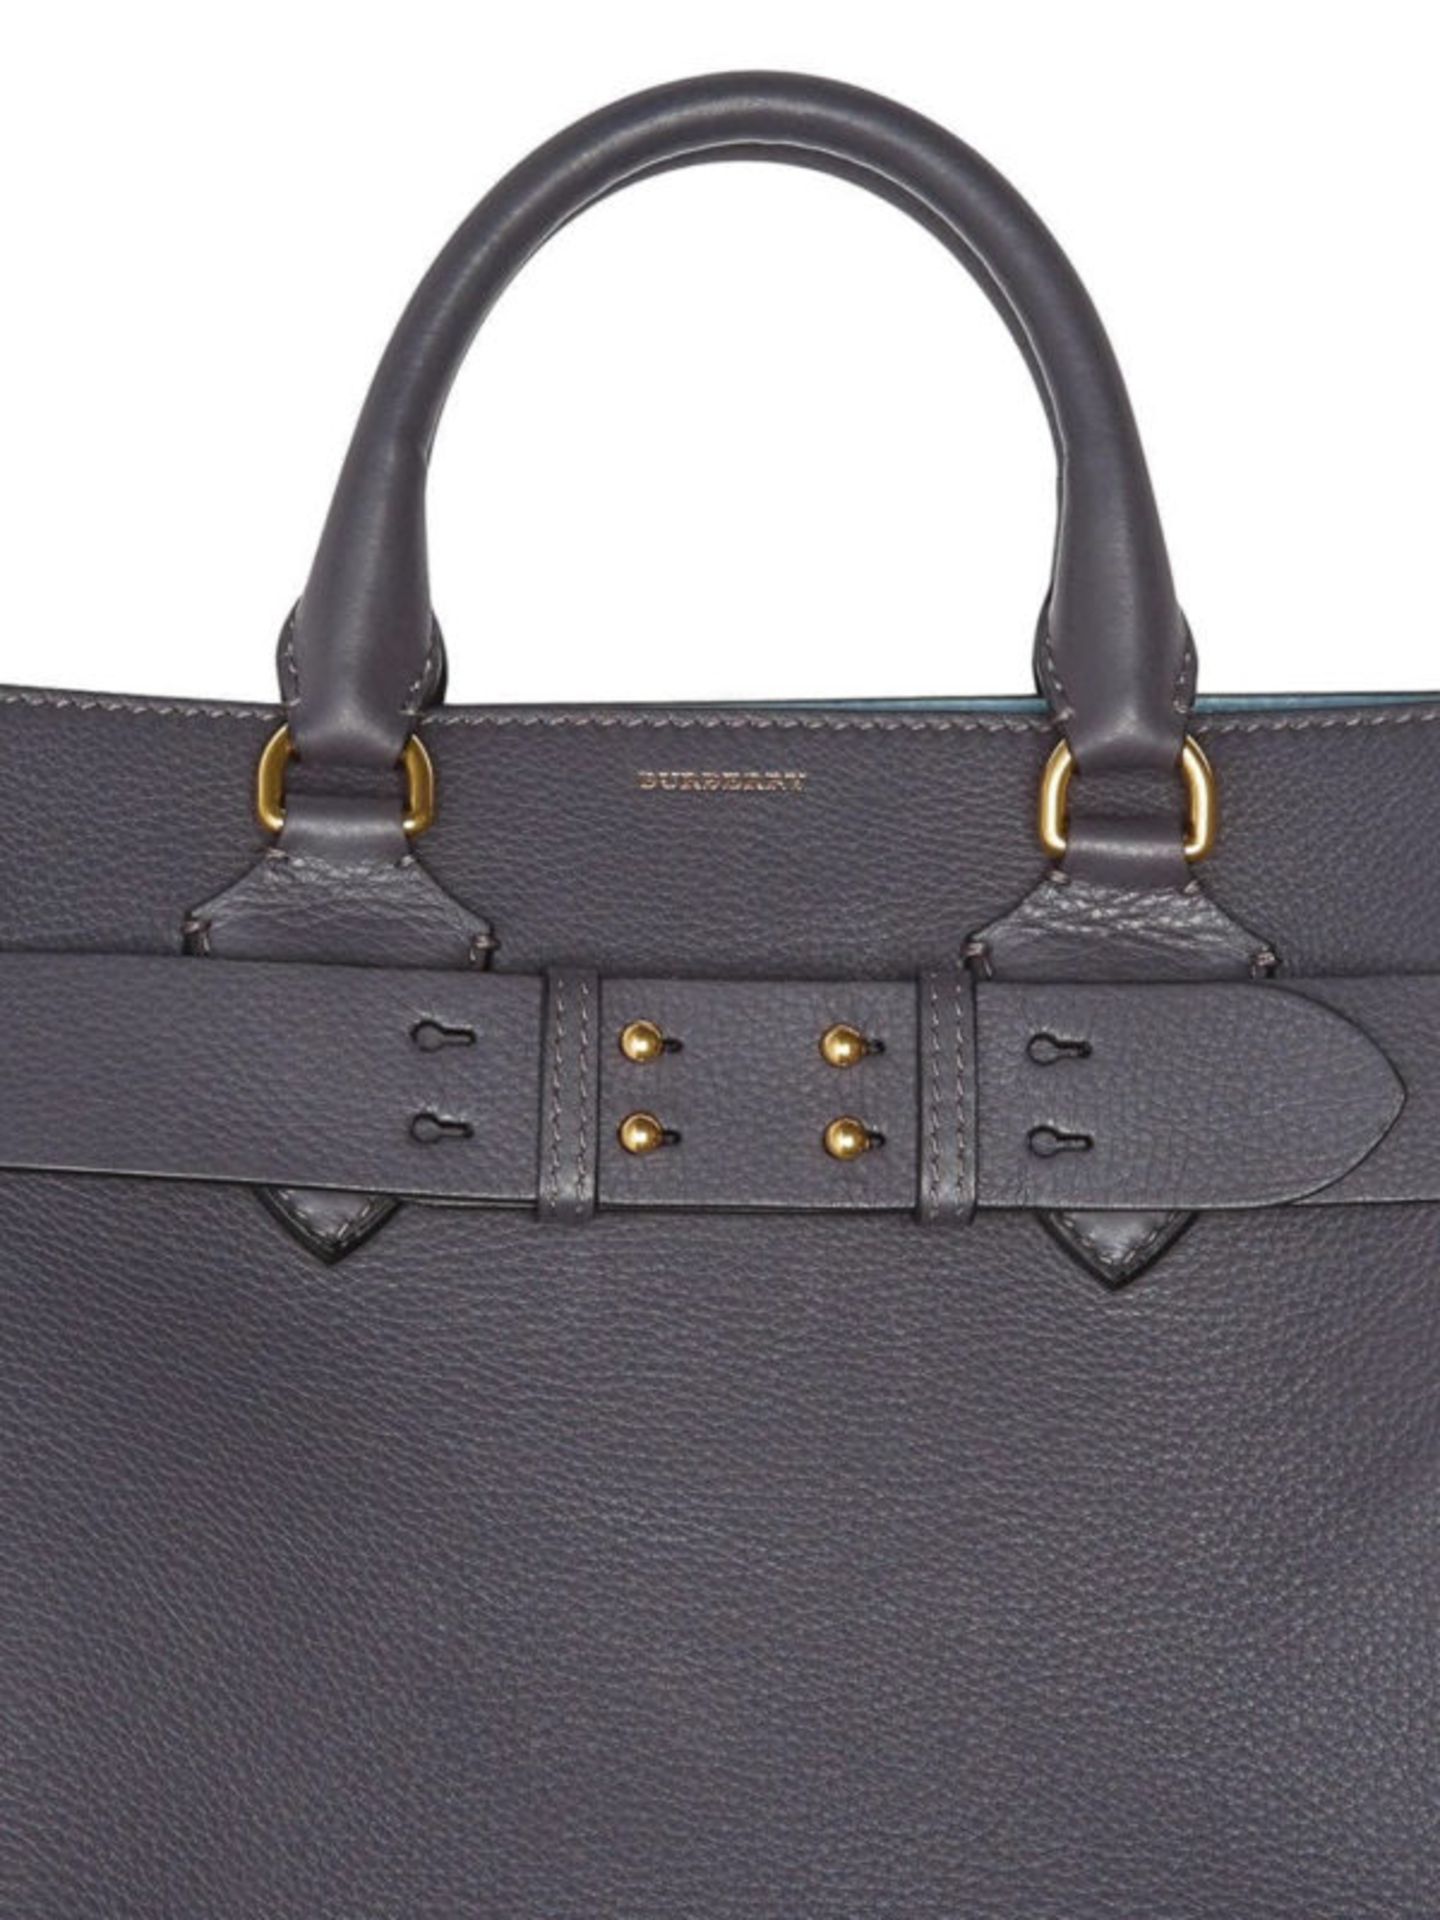 Genuine Burberry The Medium leather Belt Bag. Charcoal grey and baby blue. - Image 4 of 13